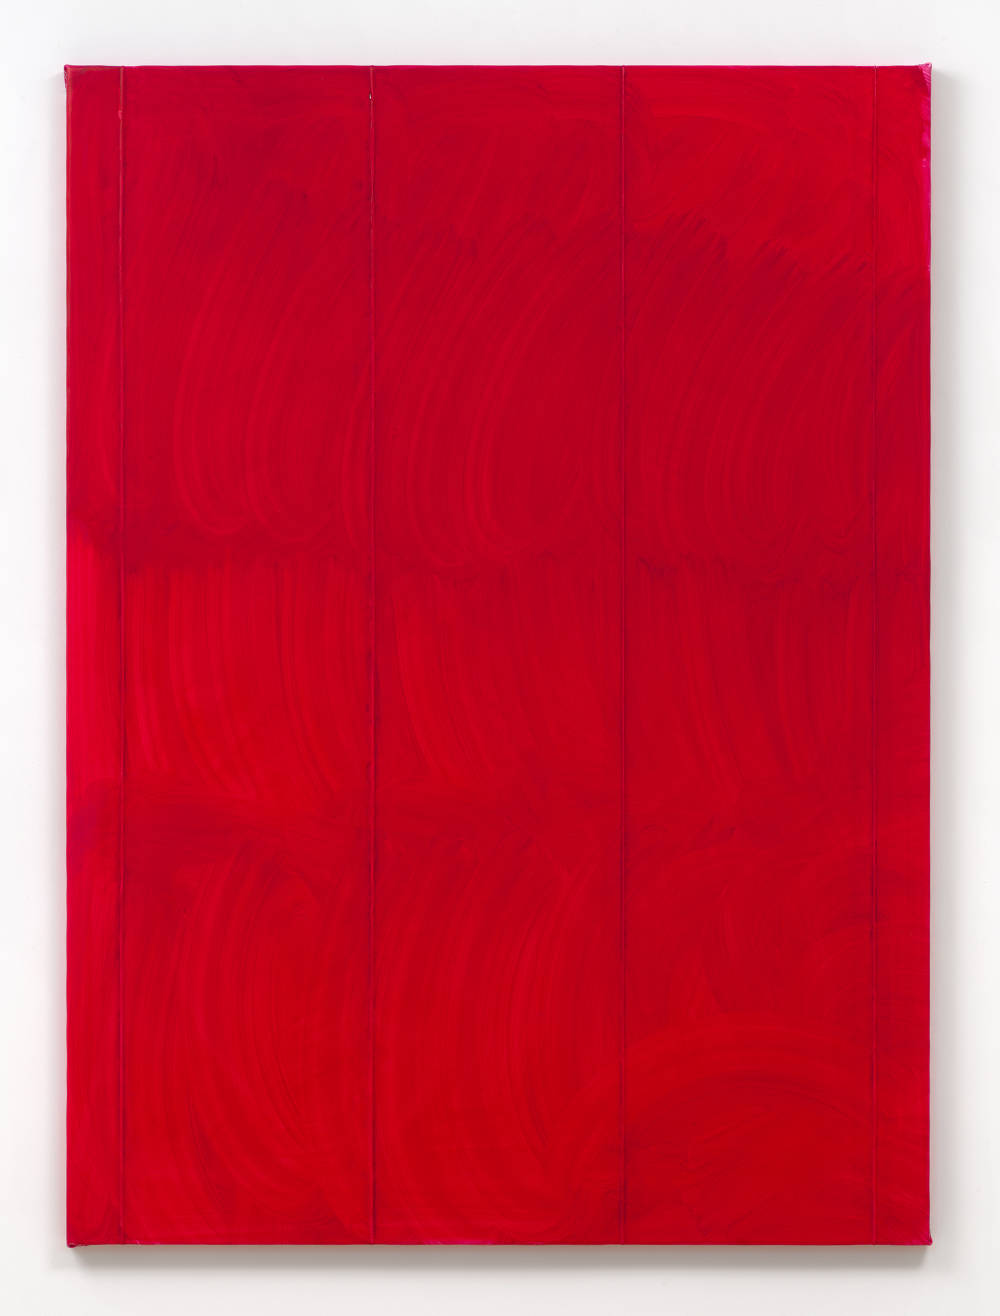 A large vertical painting. The painting is a red monochrome. The surface is brushy. 